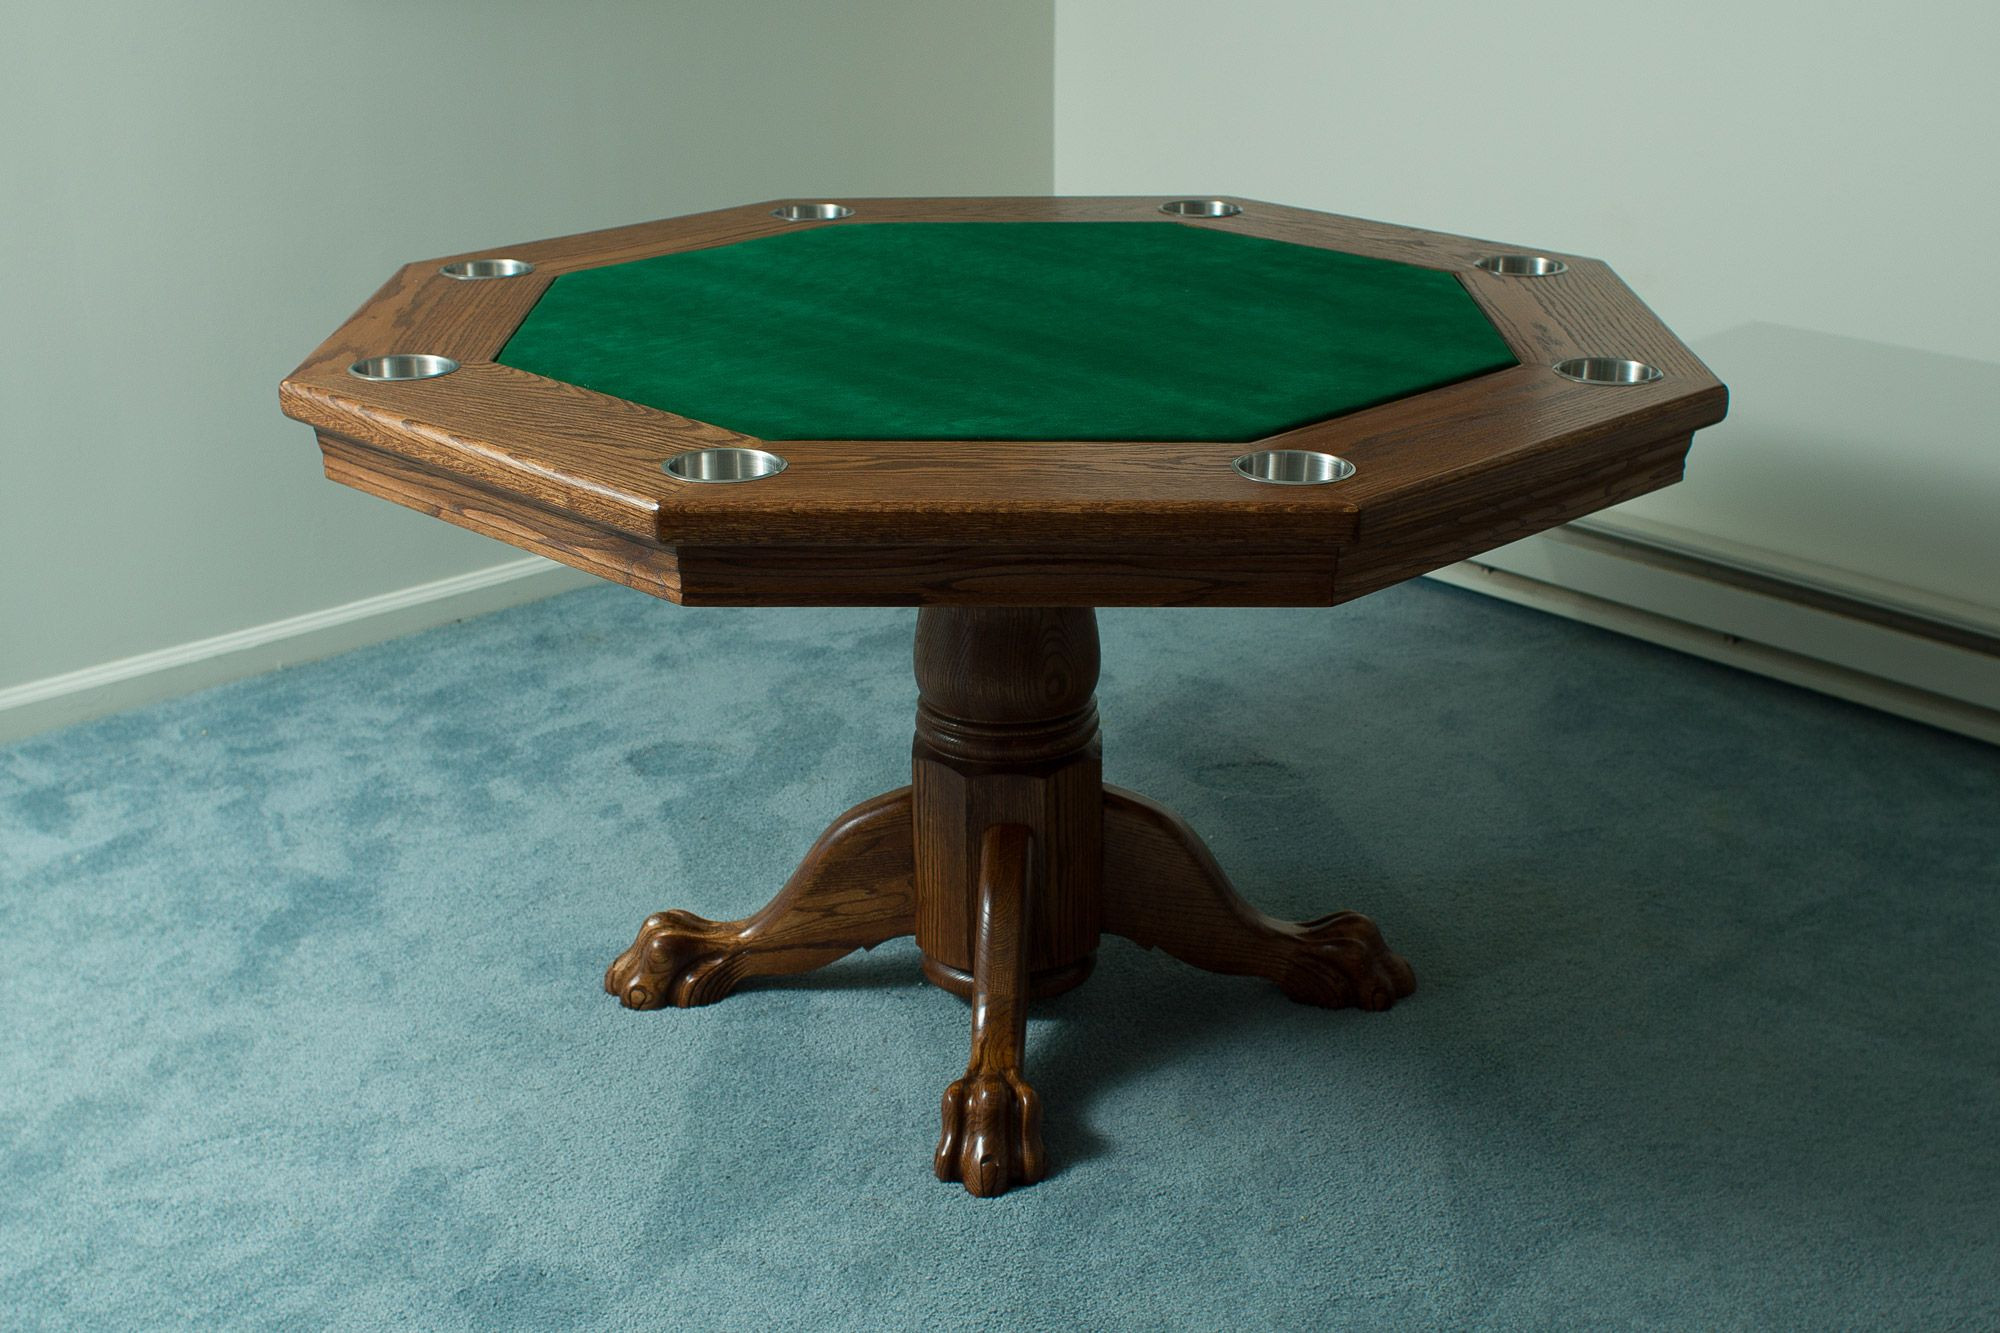 DIY Poker Table Plans
 Plans for a DIY table Maybe I can turn this into a